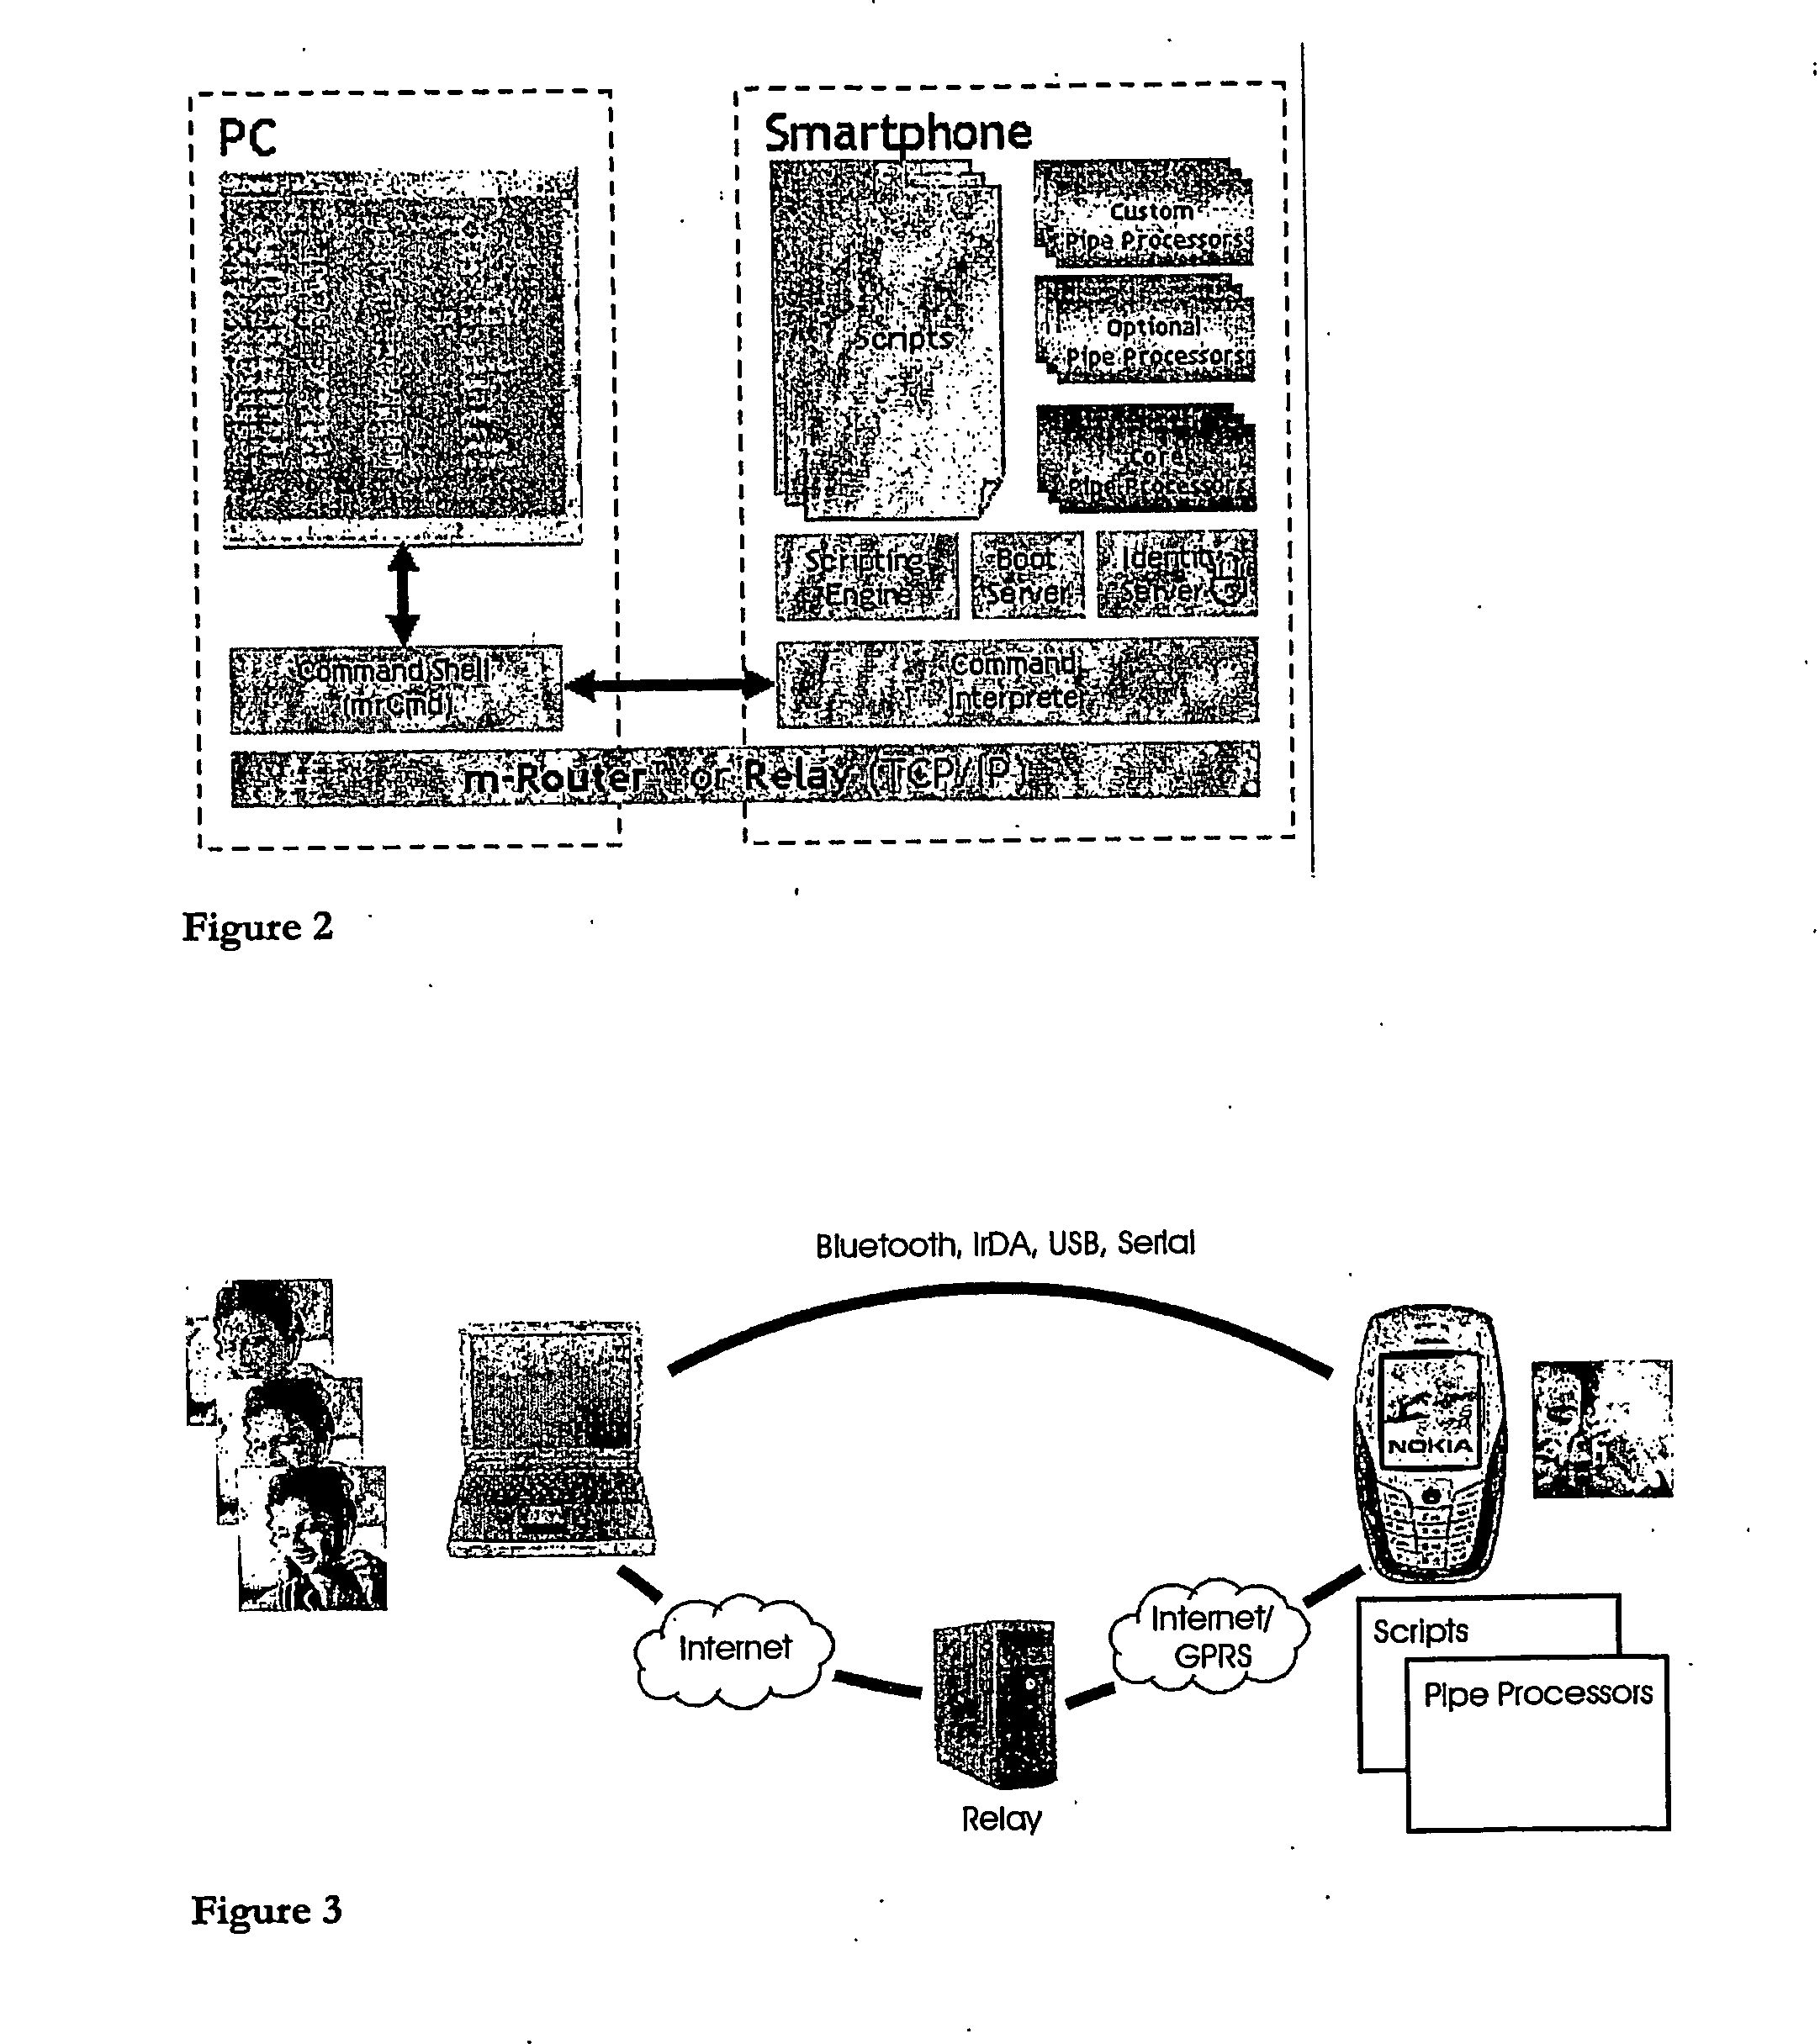 A Method of Rapid Software Application Development for a Wireless Mobile Device